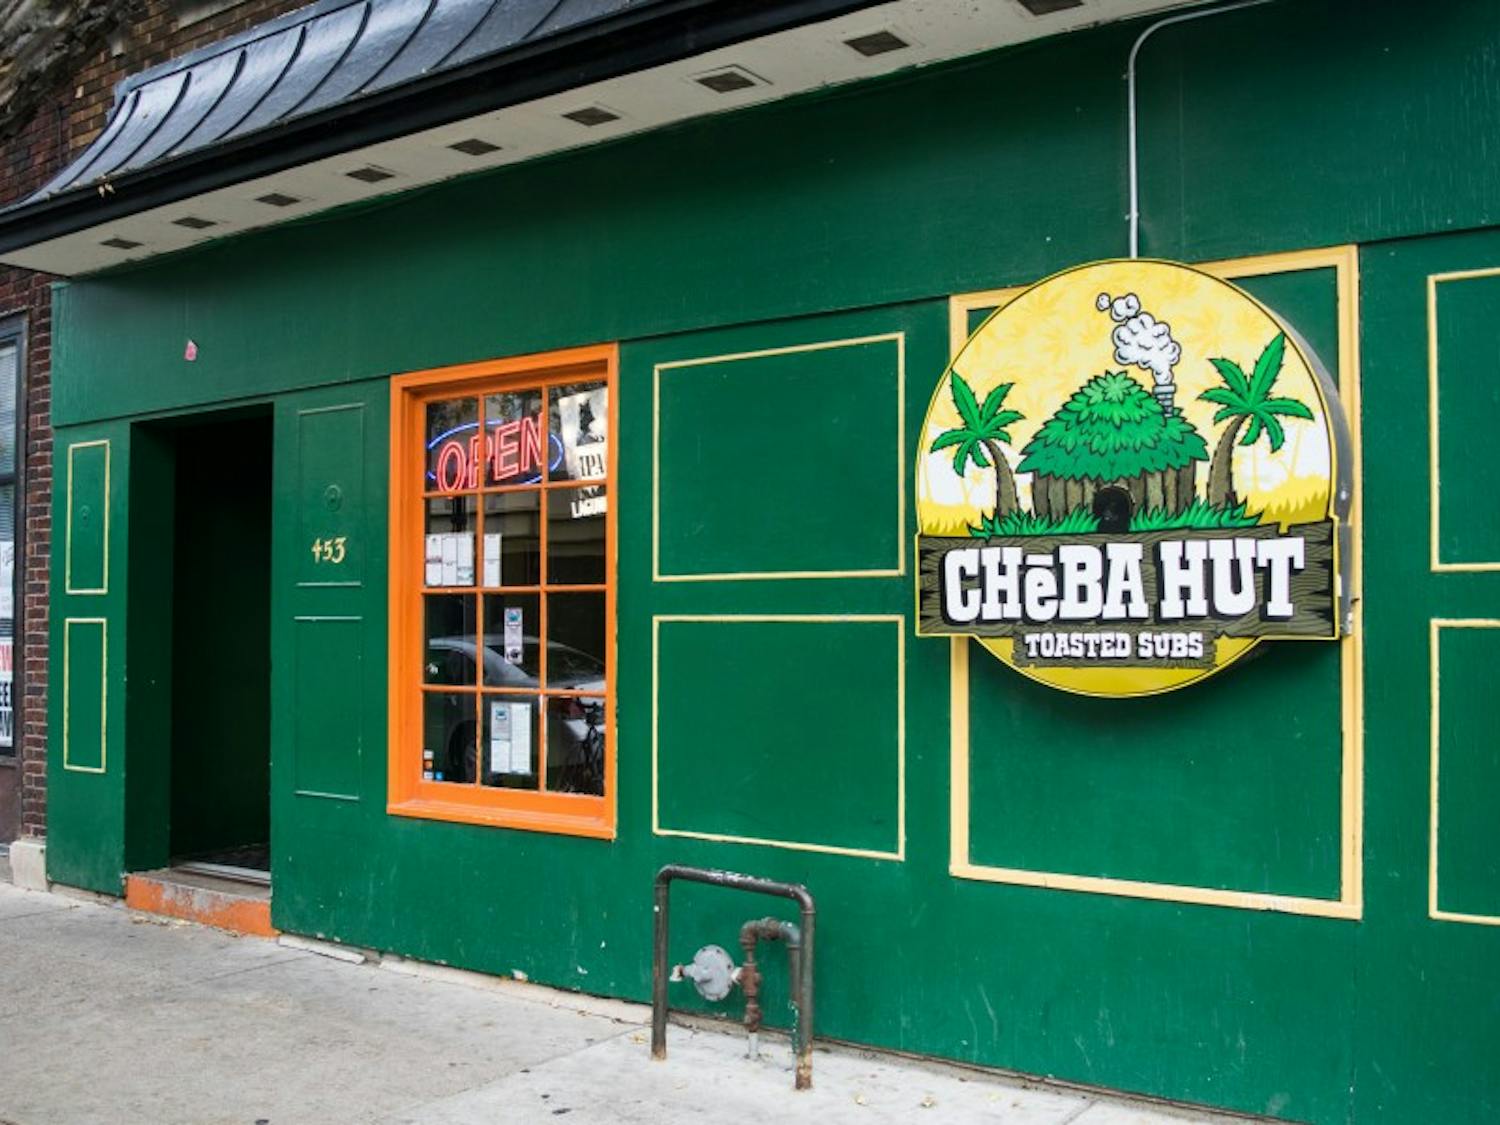 A 19-year-old pulled&nbsp;a taser on two Cheba Hut employees Tuesday after they attempted to kick her out of the late-night eatery.&nbsp;